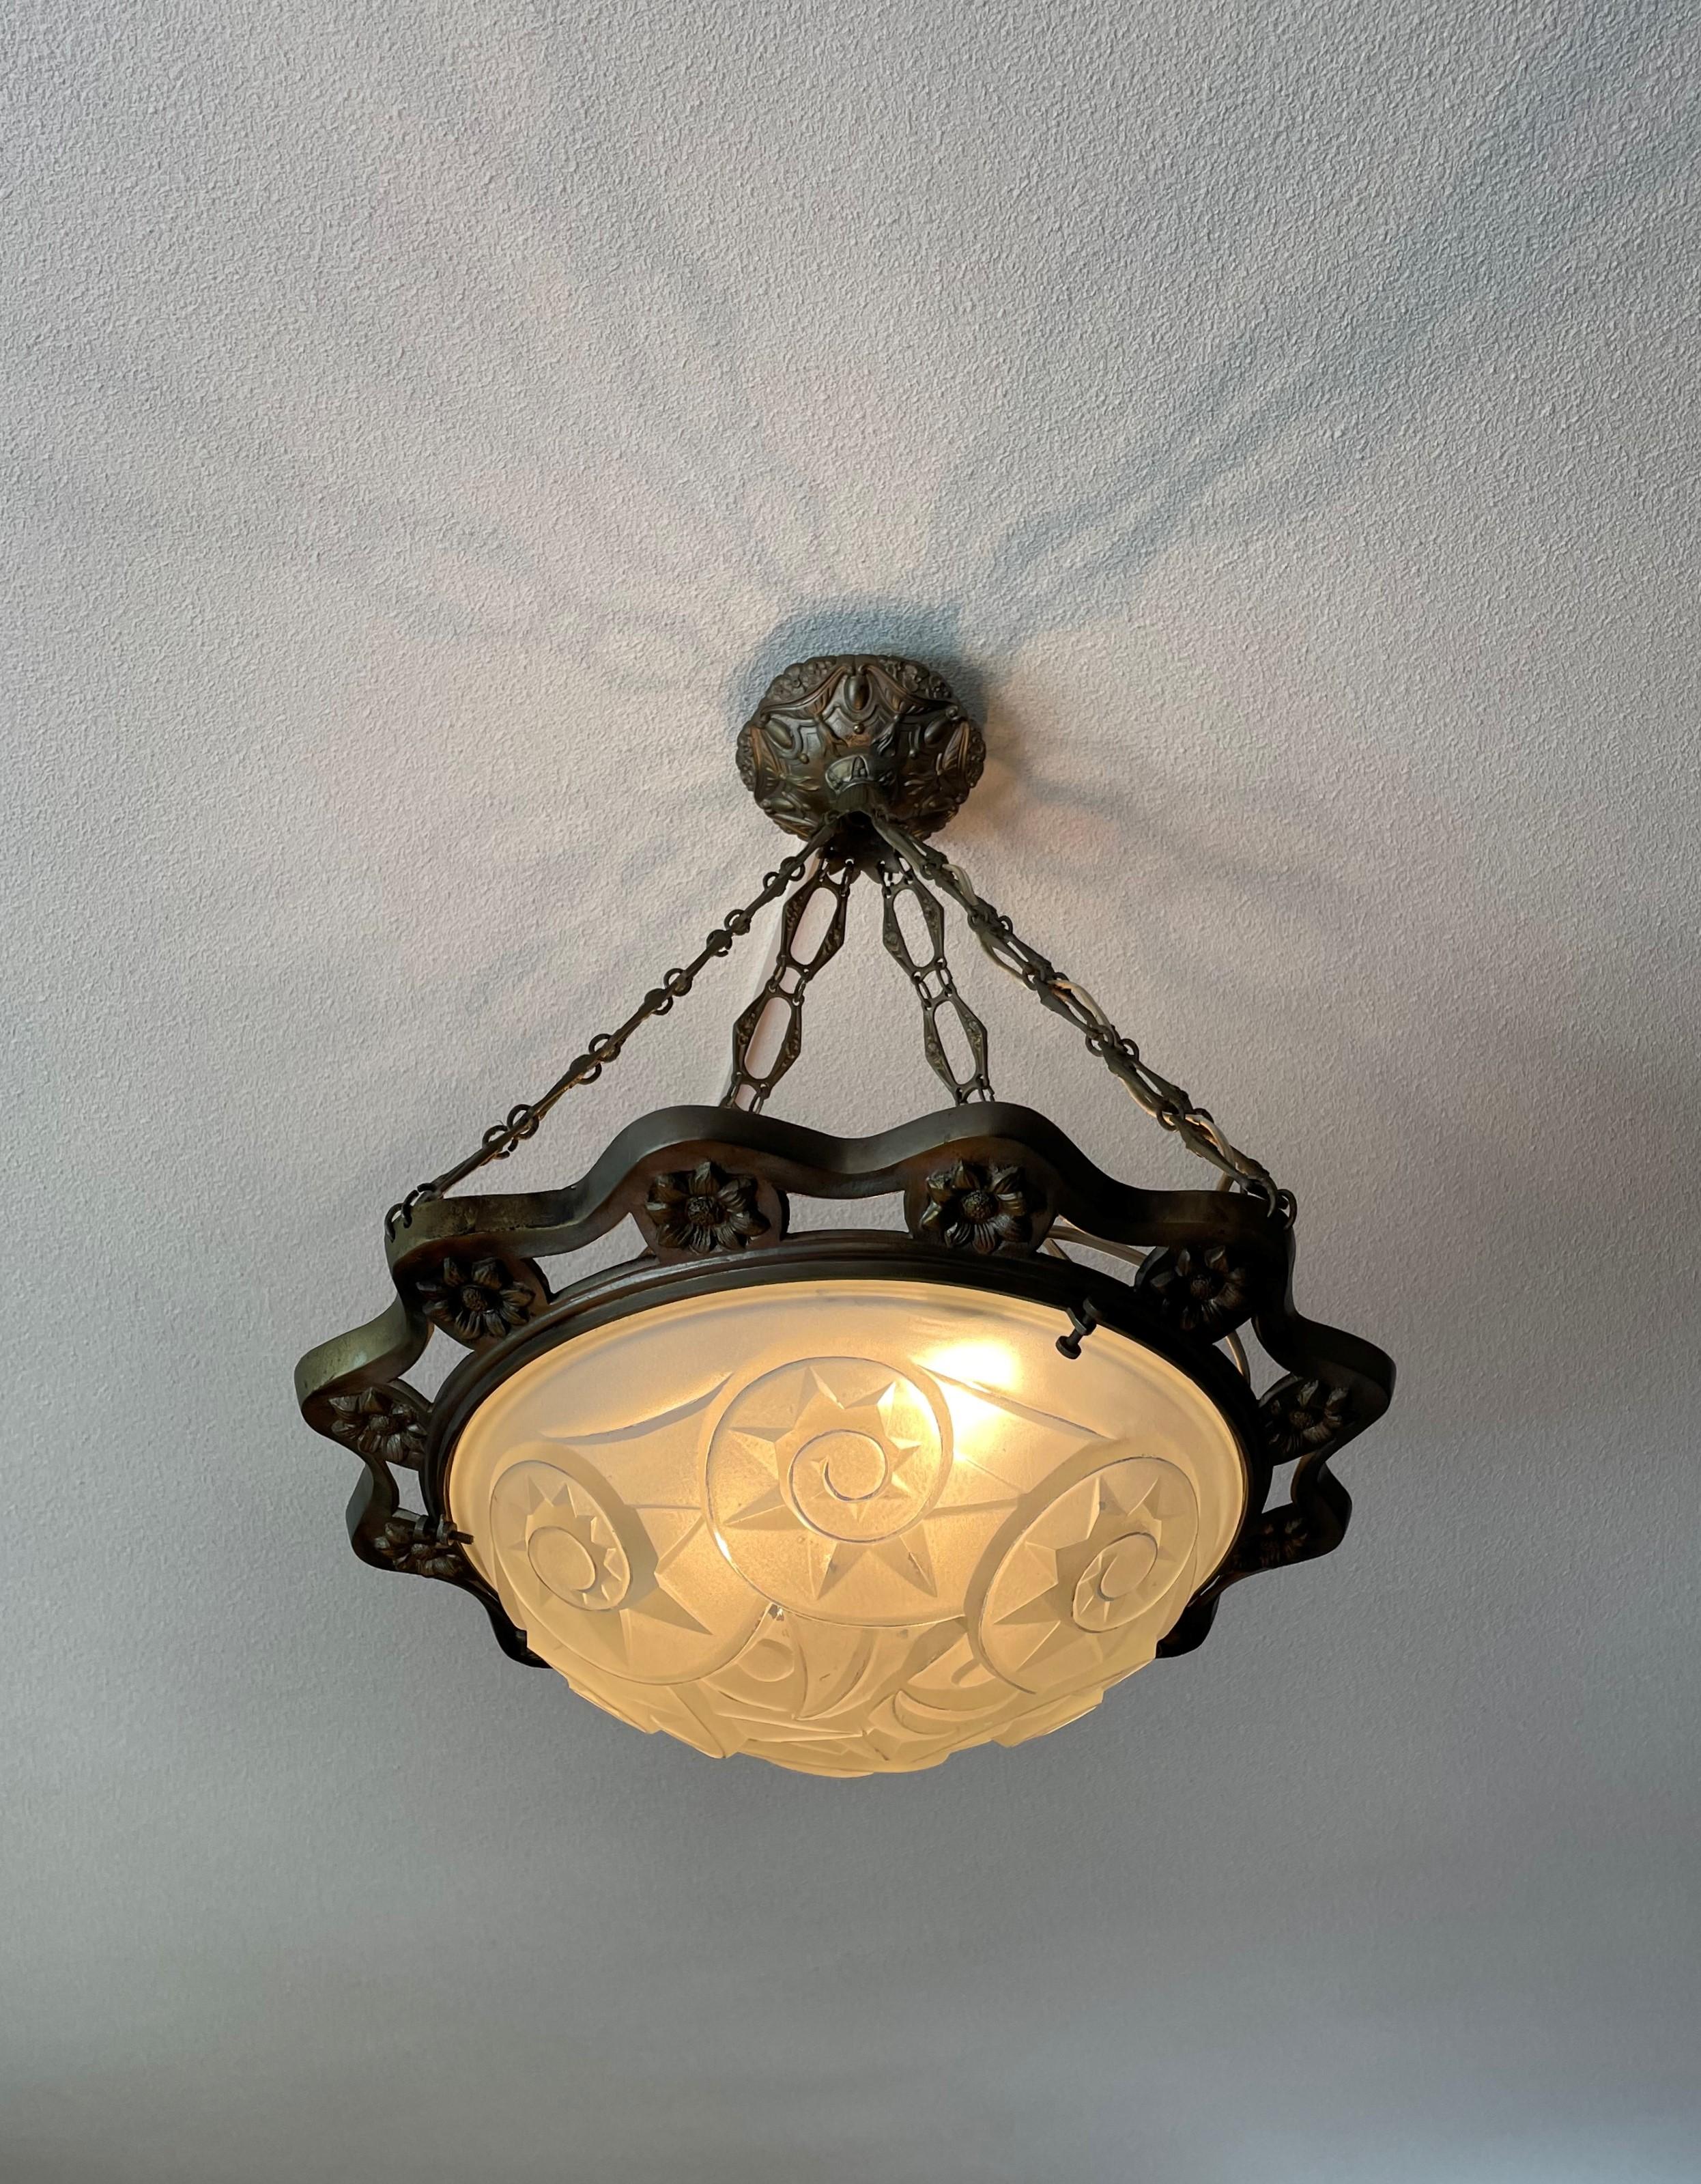 Rare antique French Art Deco pendant with flower theme.

This large and early Art Deco three-light flush mount is of great quality and design. It comes with the original nickeled bronze chains and flower decorated ring on the outside. The bronze and